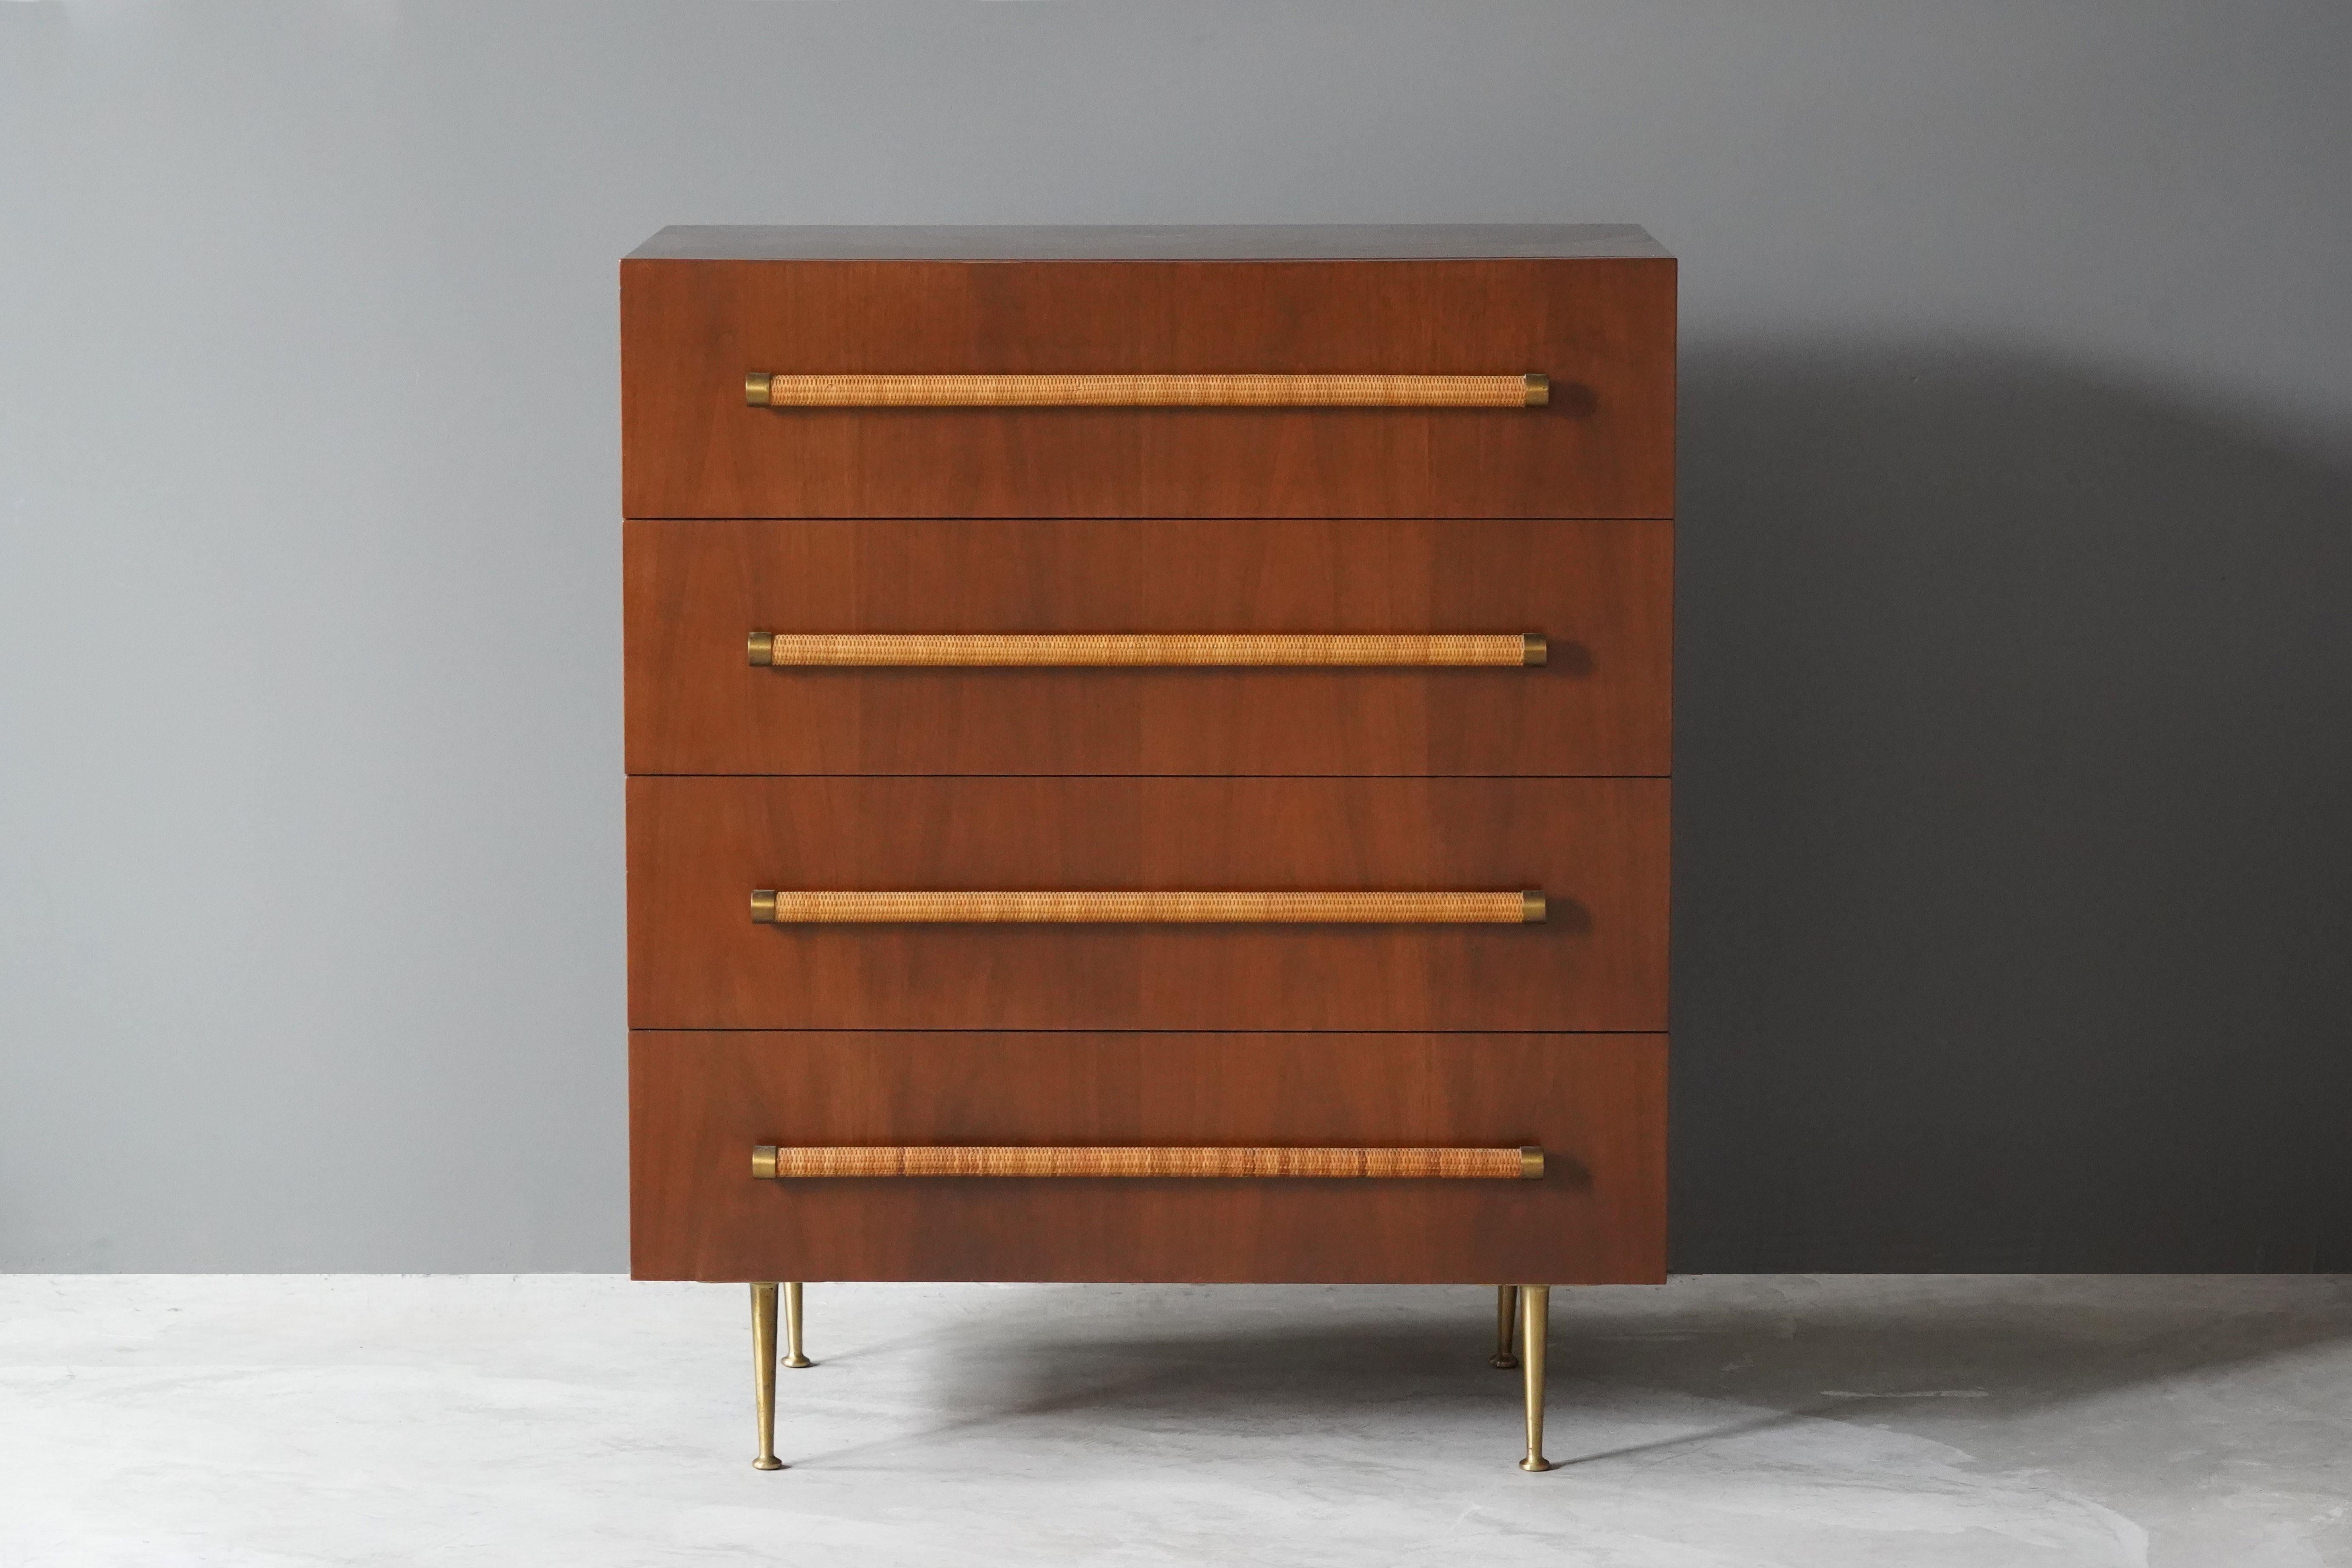 An elegant and practical chest of drawers with brass/rattan grips and brass legs. From the celebrated series of furniture T.H. Robsjohn-Gibbings designed for Widdicomb Furniture Company. 

Robsjohn-Gibbings was active in the same era as Paul